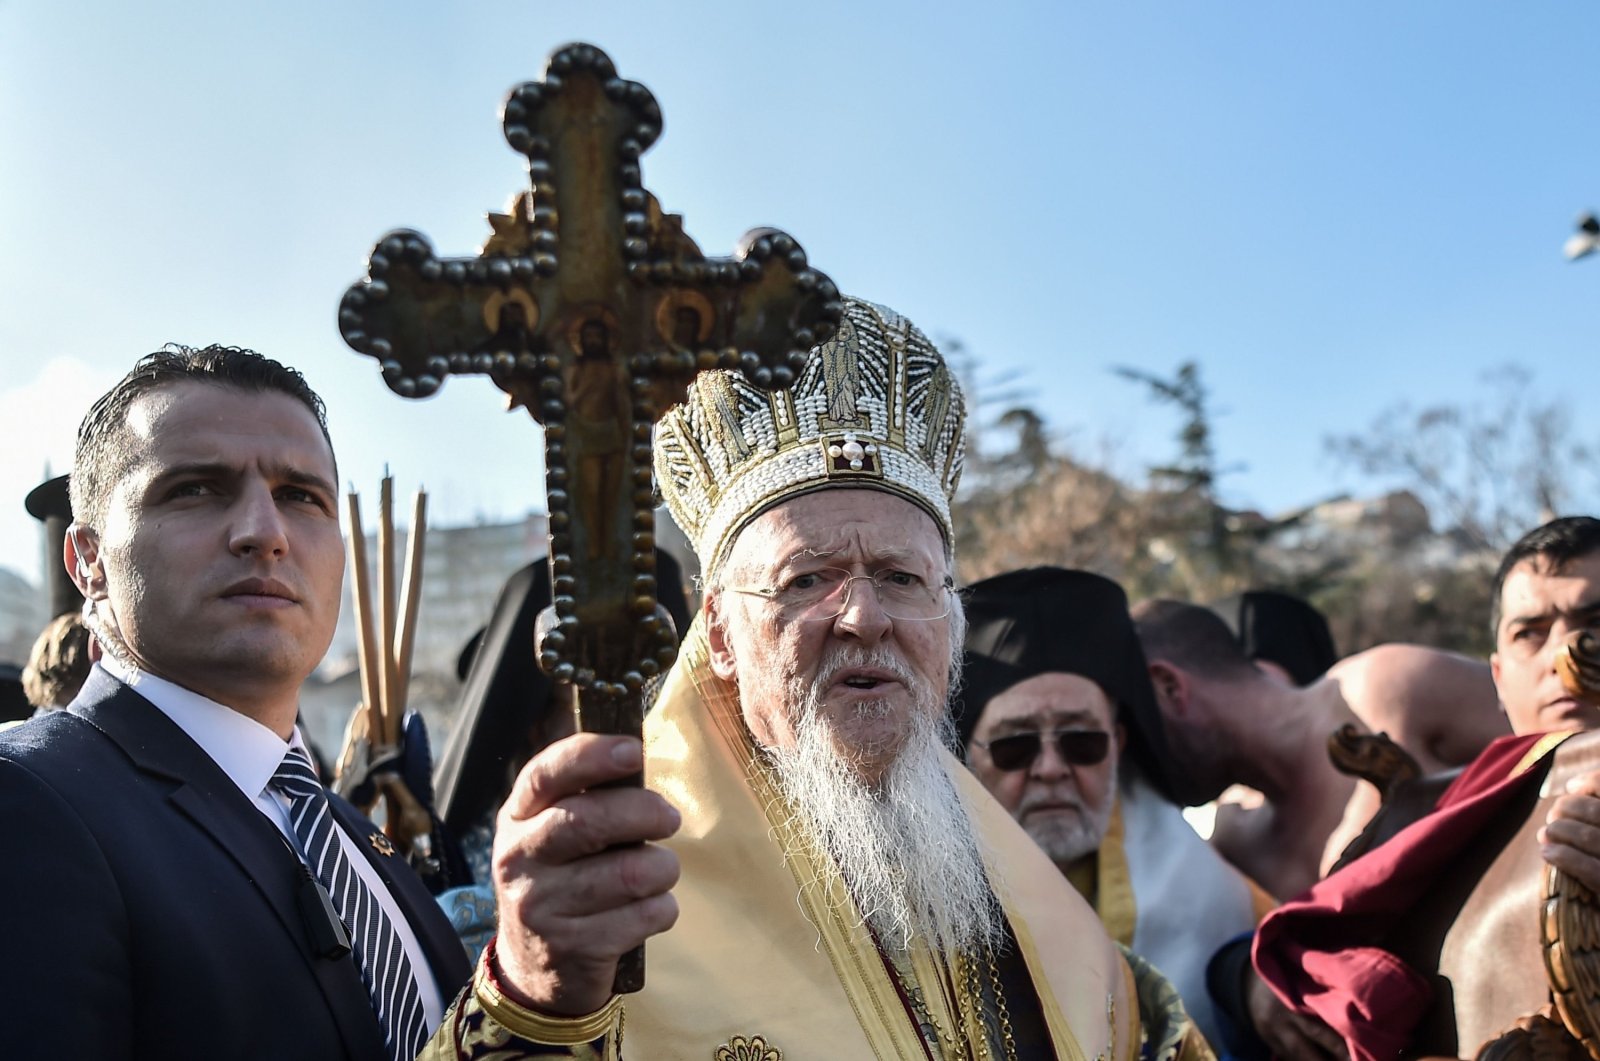 Patriarch Bartholomew I holds a wooden cross during Epiphany celebrations, in Istanbul, Turkey, Jan. 6, 2018. (AFP File Photo)